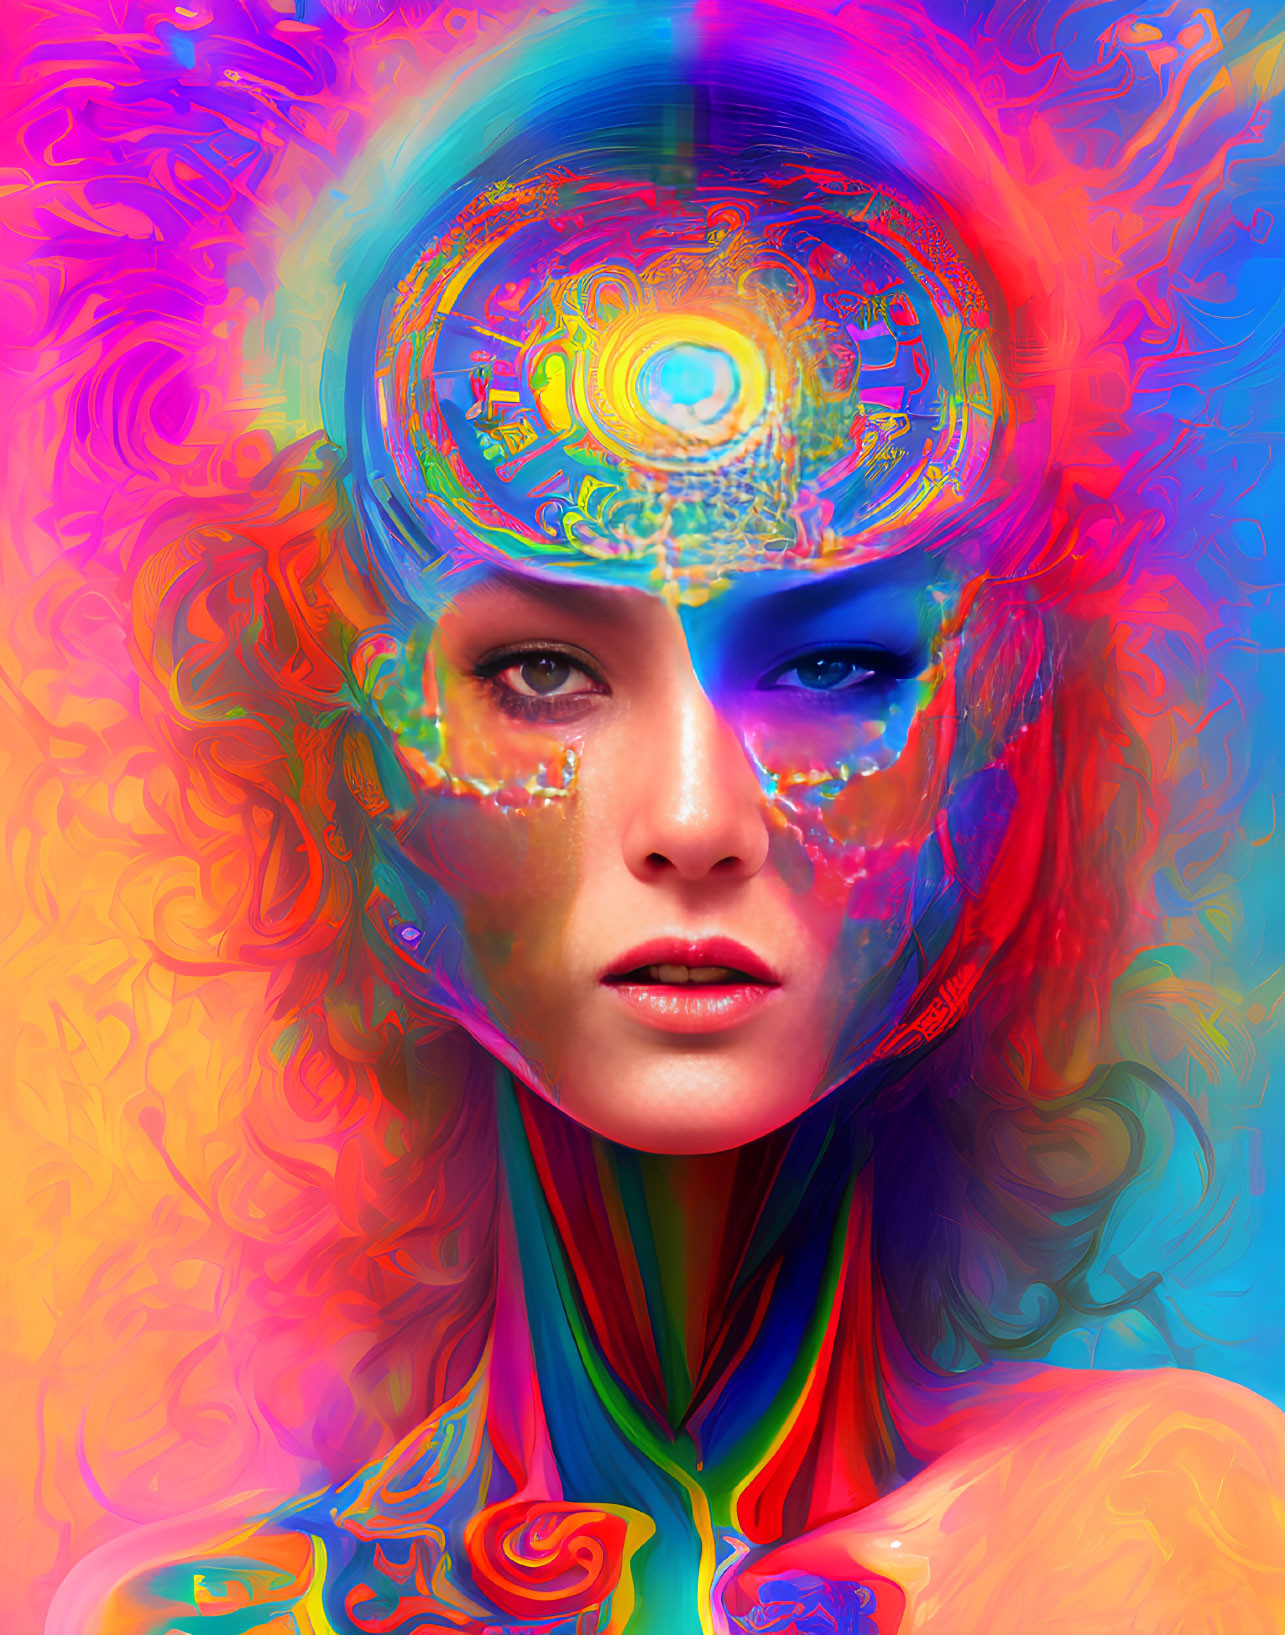 Colorful Psychedelic Woman Artwork with Streaming Tears